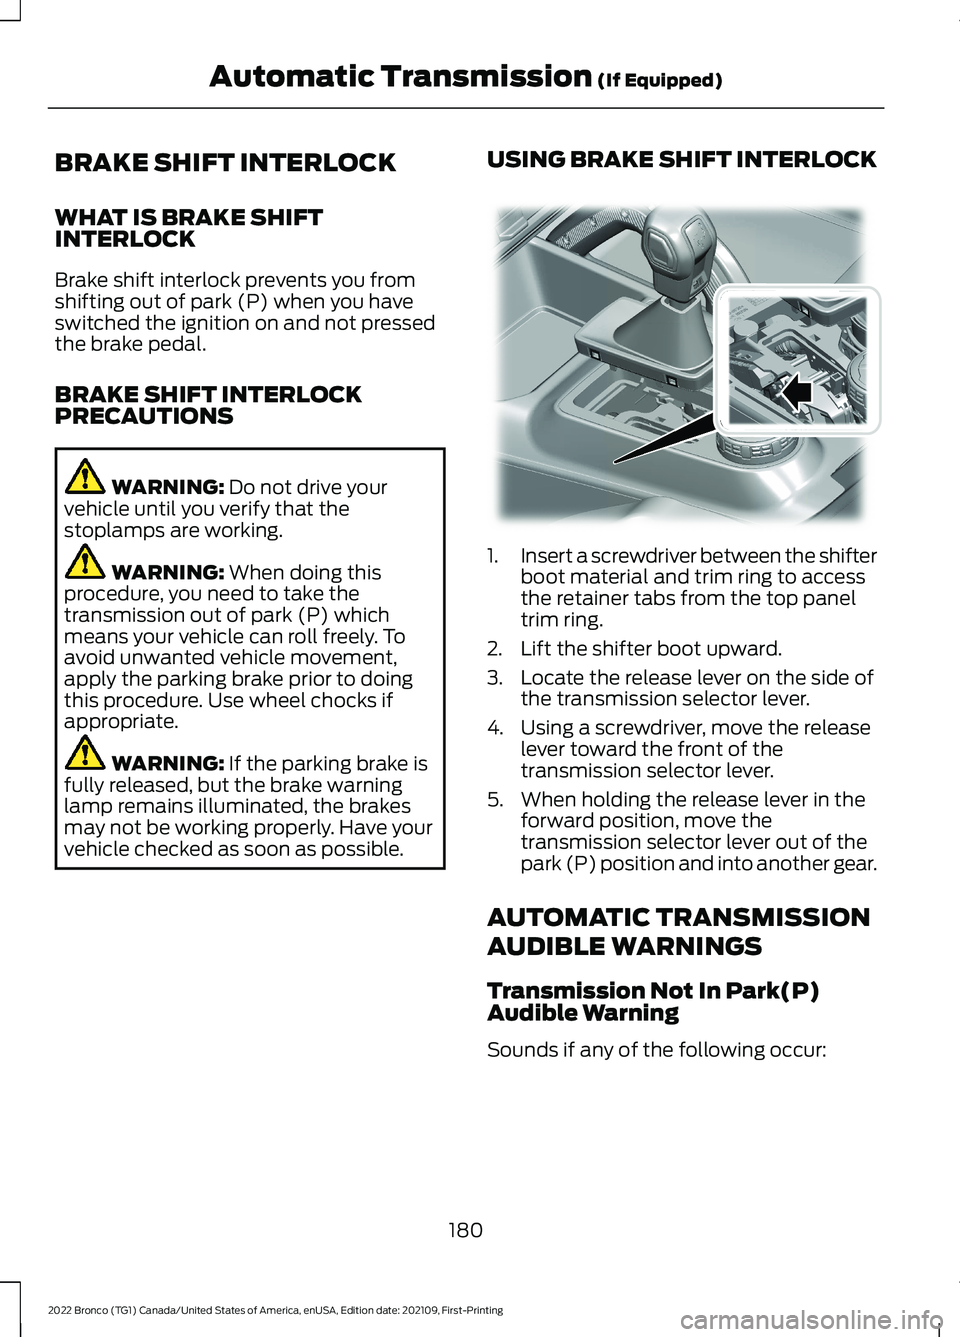 FORD BRONCO 2022  Owners Manual BRAKE SHIFT INTERLOCK
WHAT IS BRAKE SHIFTINTERLOCK
Brake shift interlock prevents you fromshifting out of park (P) when you haveswitched the ignition on and not pressedthe brake pedal.
BRAKE SHIFT INT